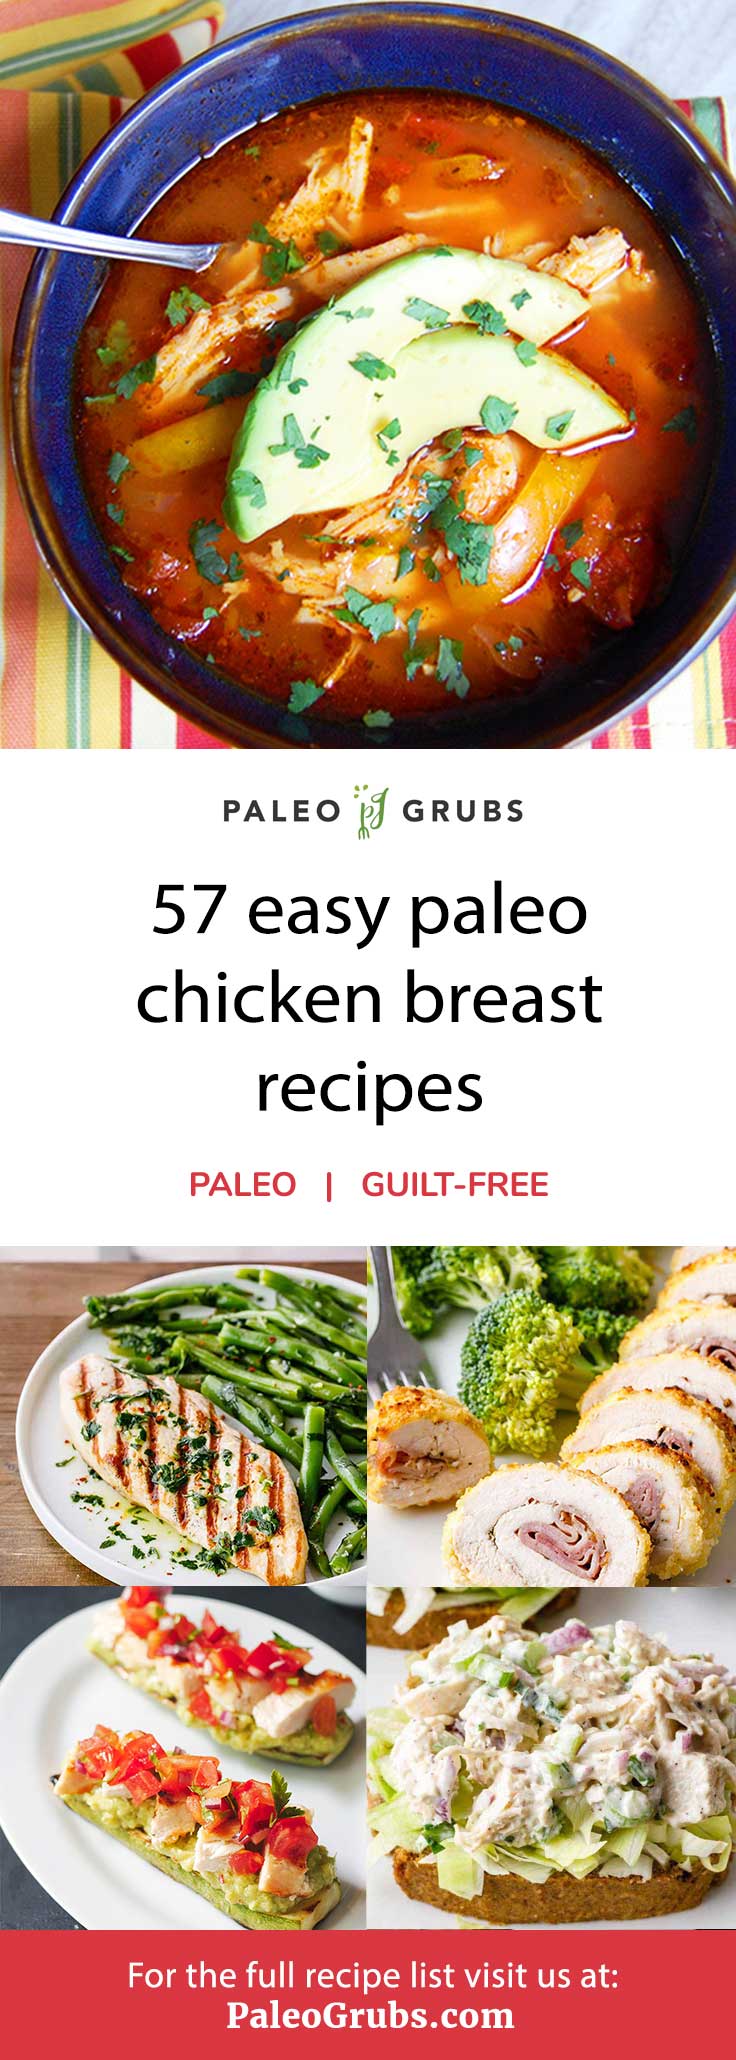 The holy grail for delicious and easy paleo chicken breast recipe ideas.